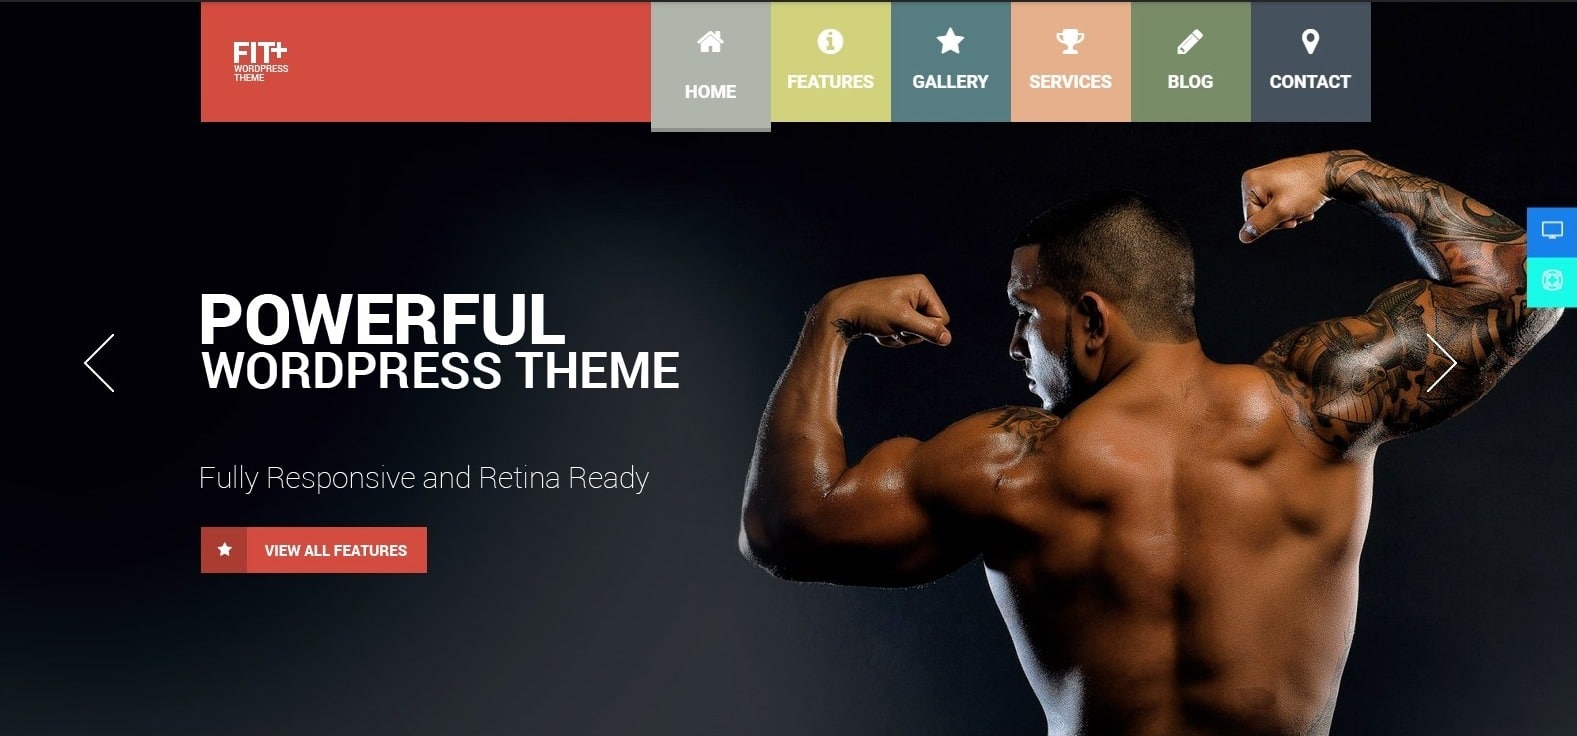 fit+-sports-website-template